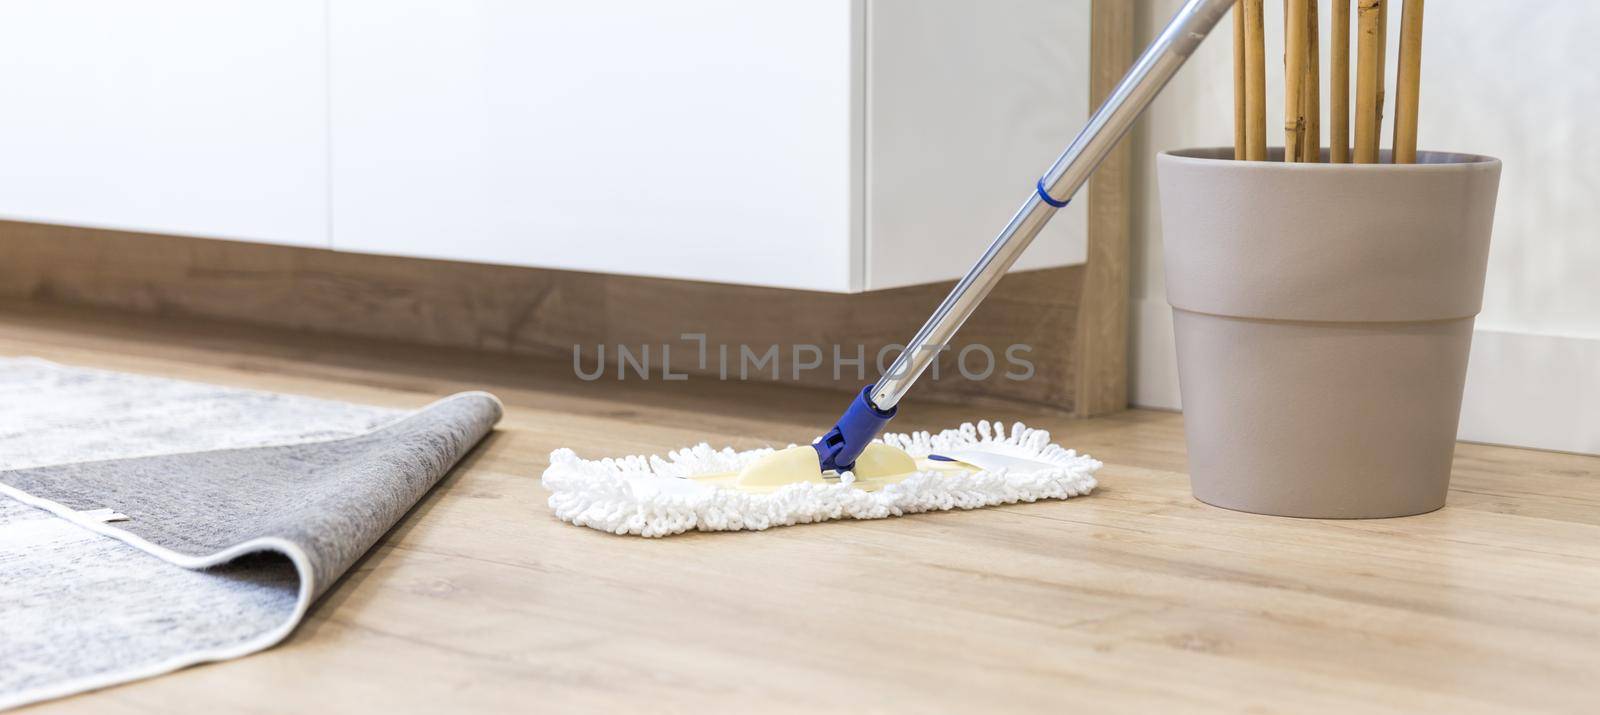 Wooden floor with white mop, cleaning service concept by Mariakray